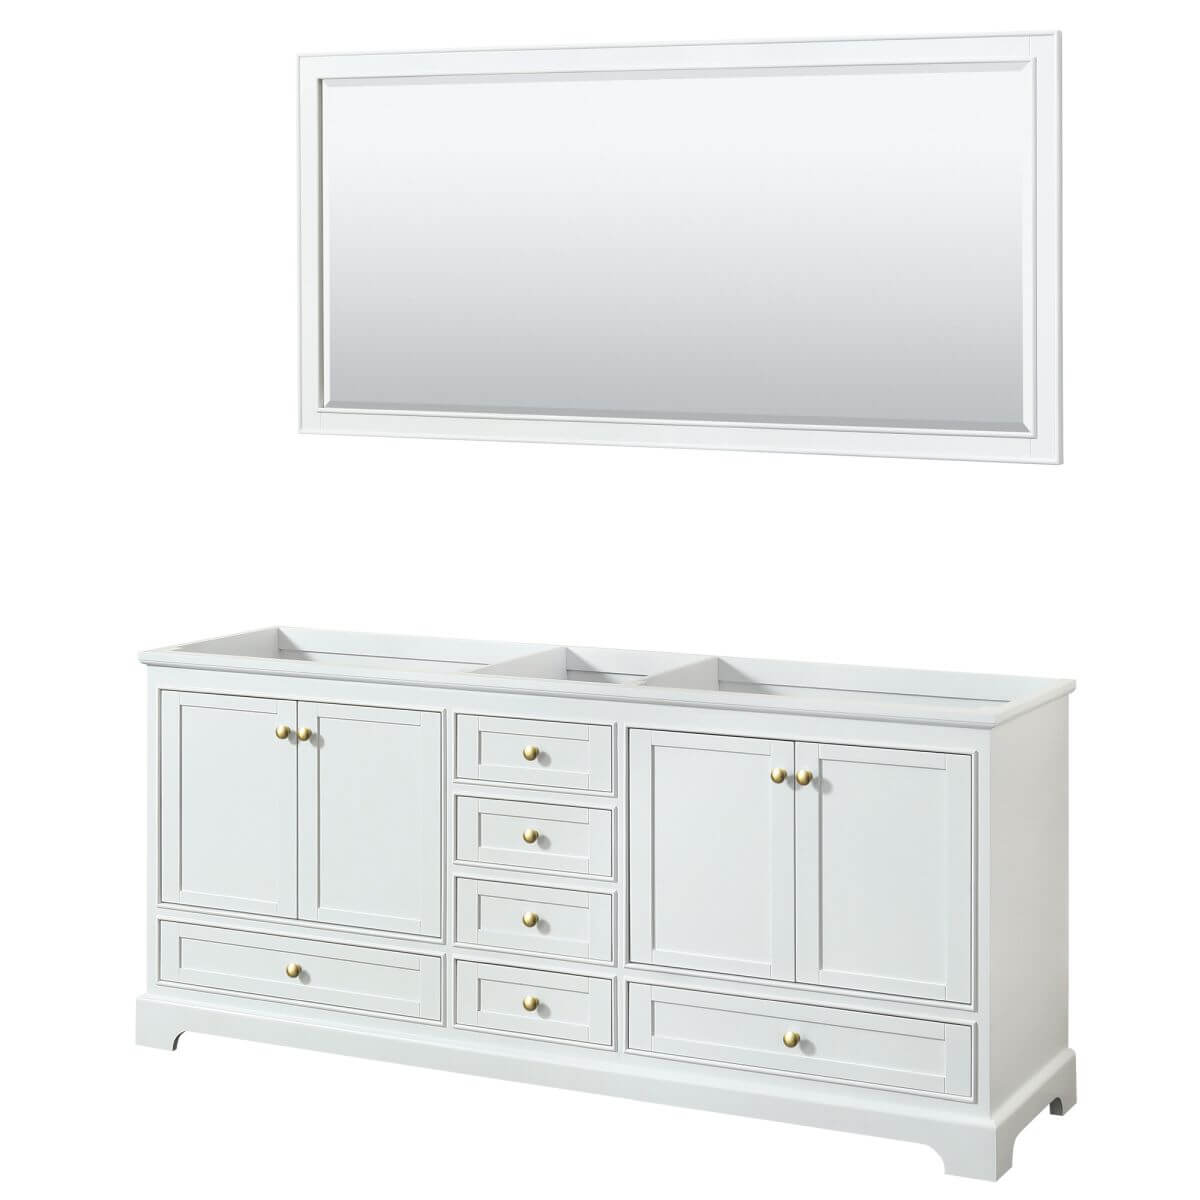 Wyndham Collection Deborah 80 inch Double Bathroom Vanity in White with 70 inch Mirror, Brushed Gold Trim, No Countertop and No Sinks - WCS202080DWGCXSXXM70